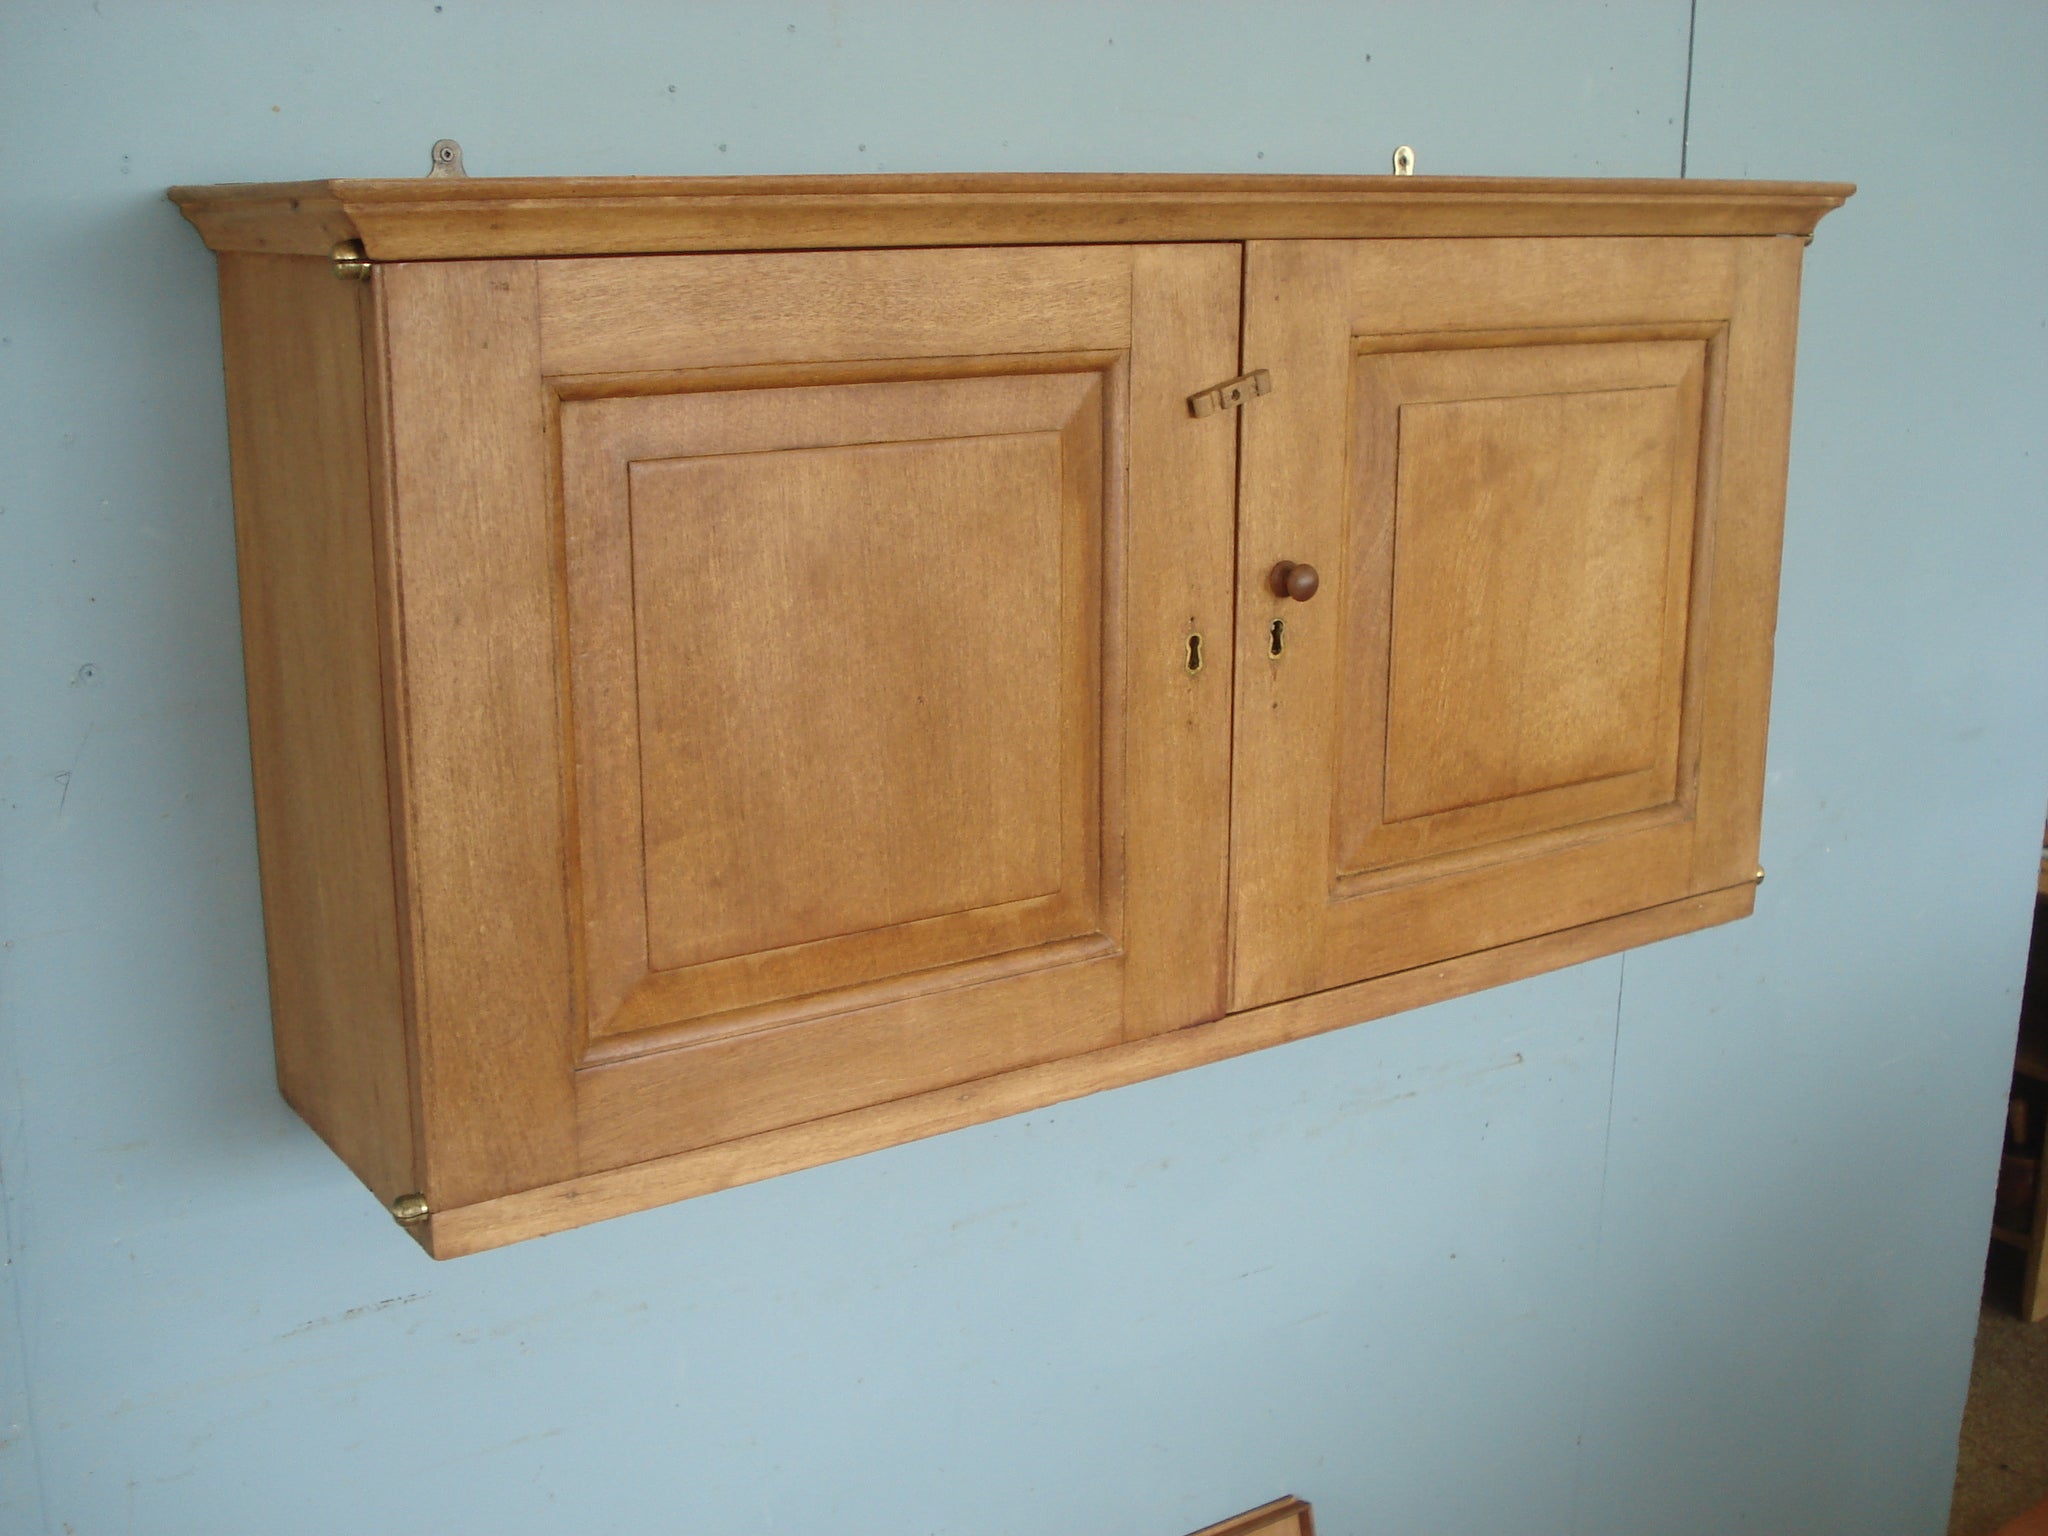 Wall cabinet in blonde mahogany with specimen drawers and slide out shelves. Circa 1860